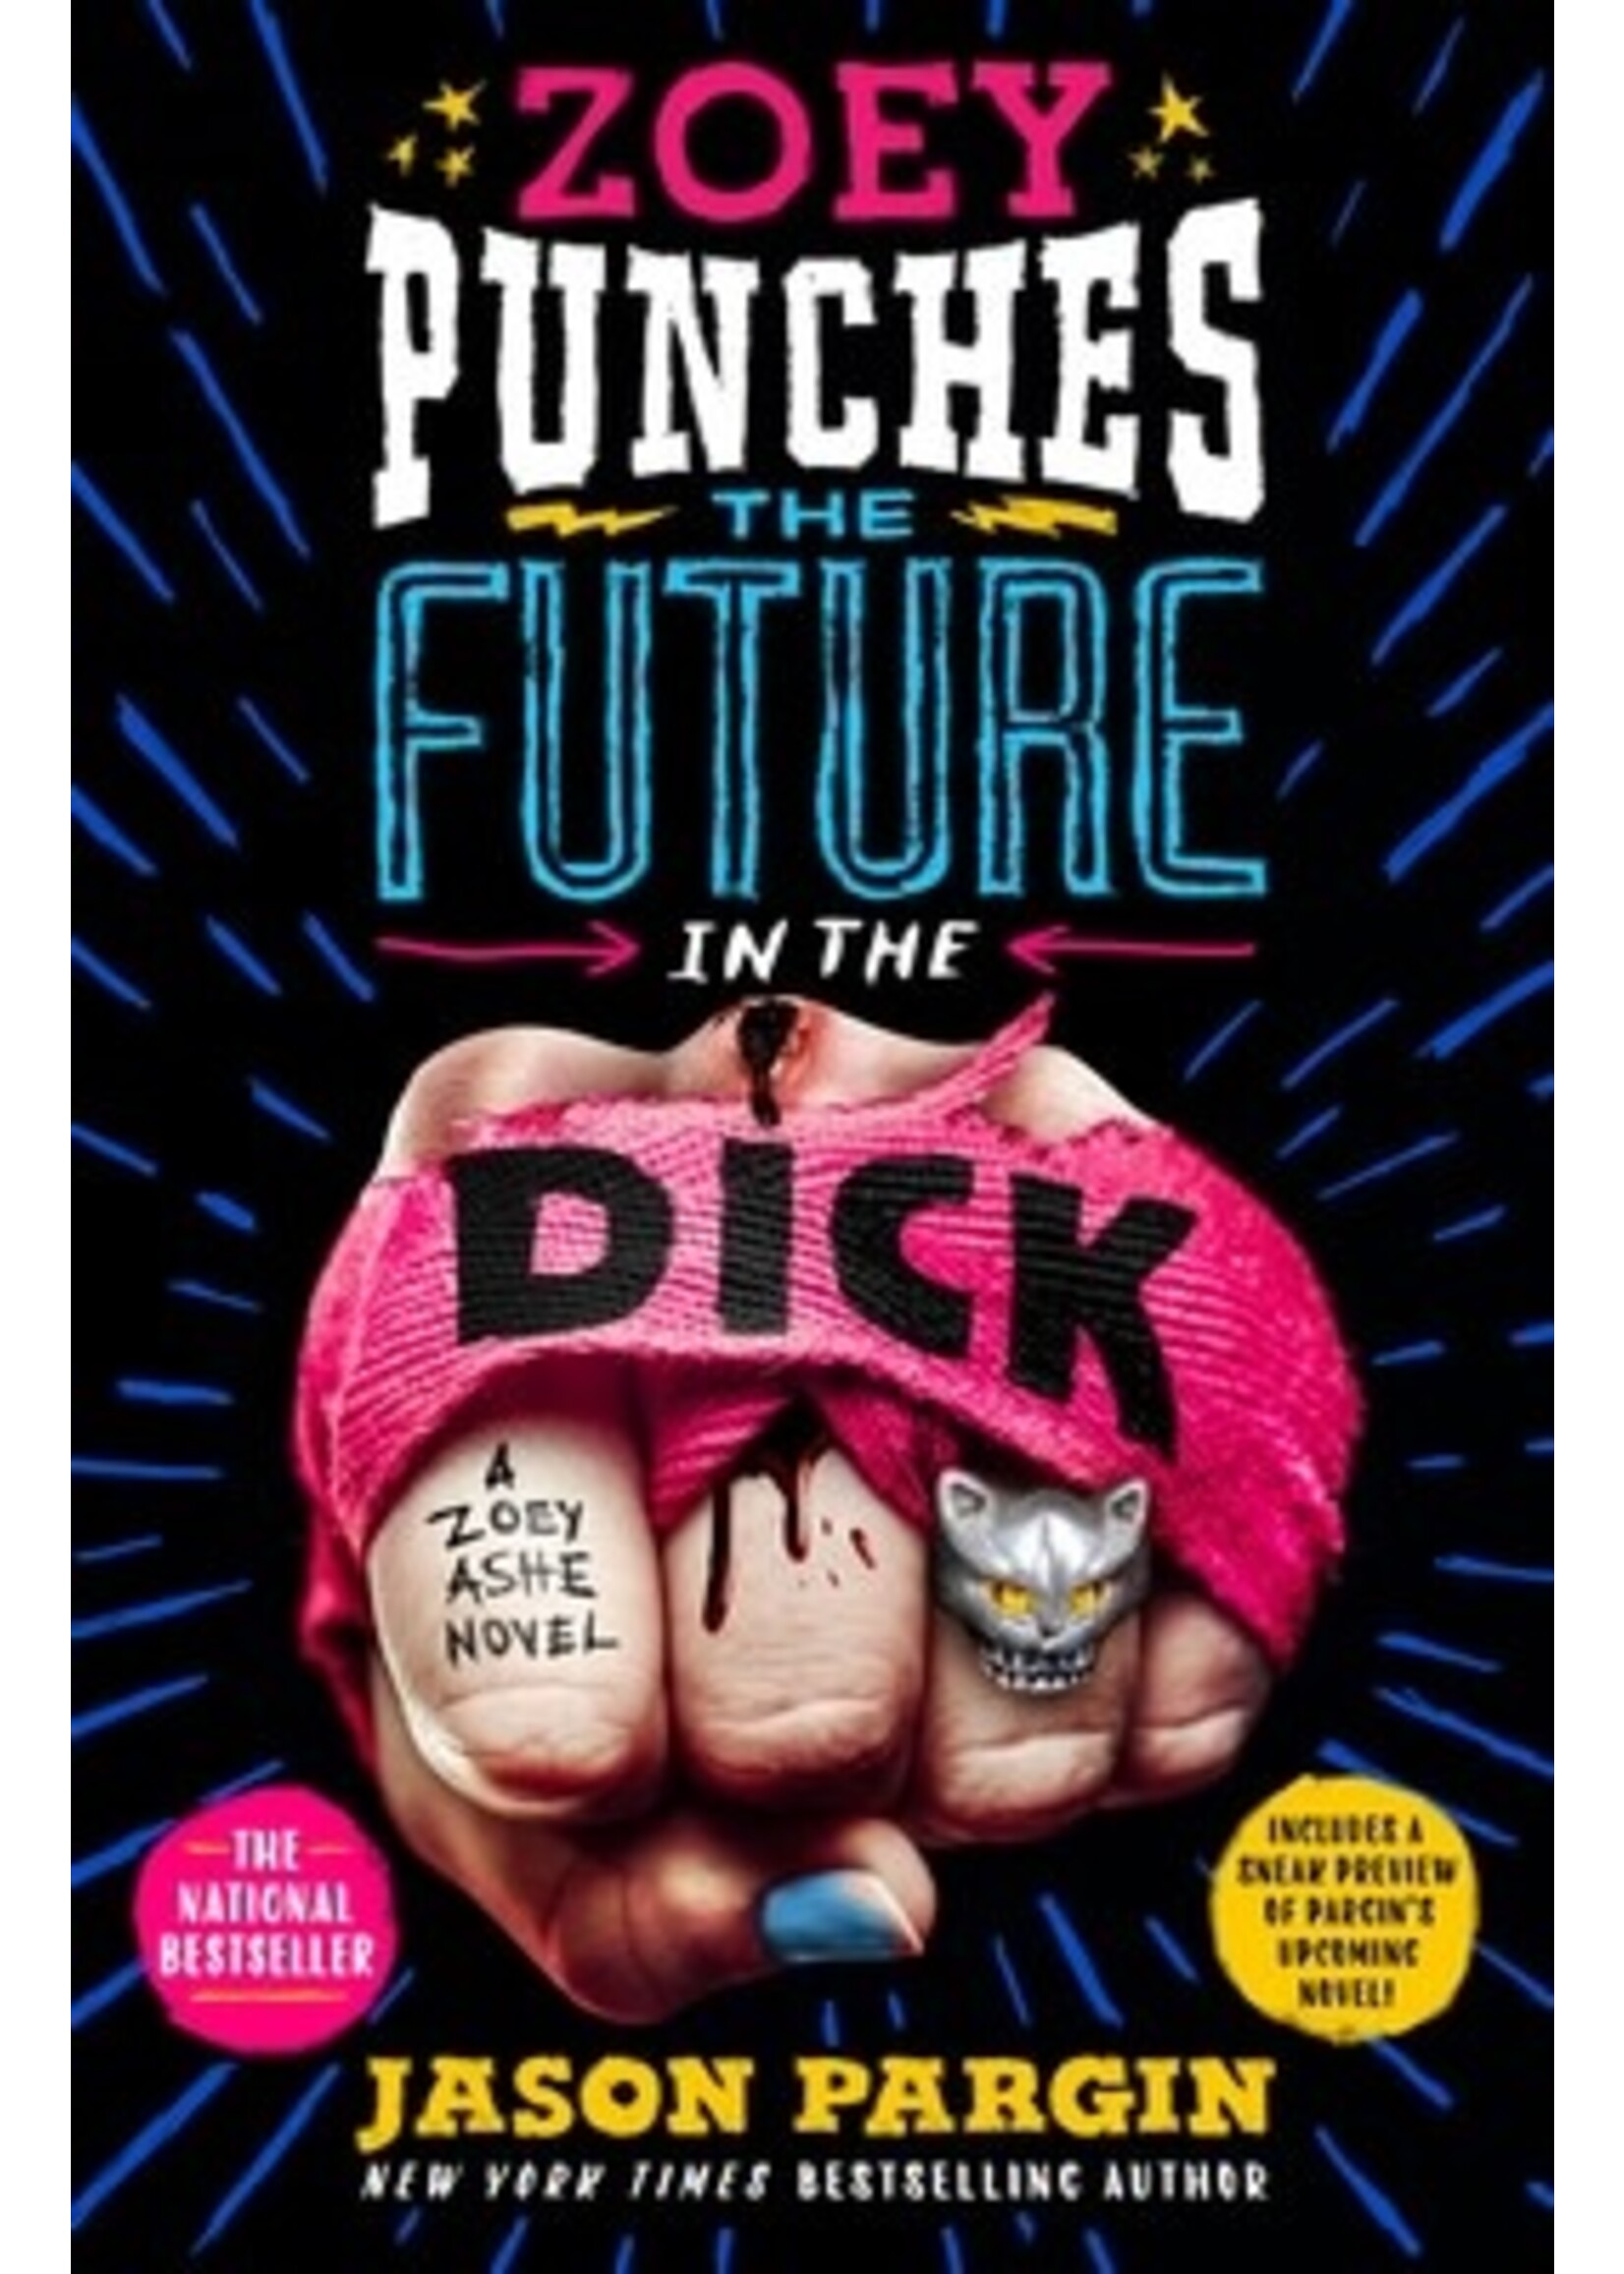 Zoey Punches the Future in the Dick (Zoey Ashe #2) by David Wong, Jason Pargin